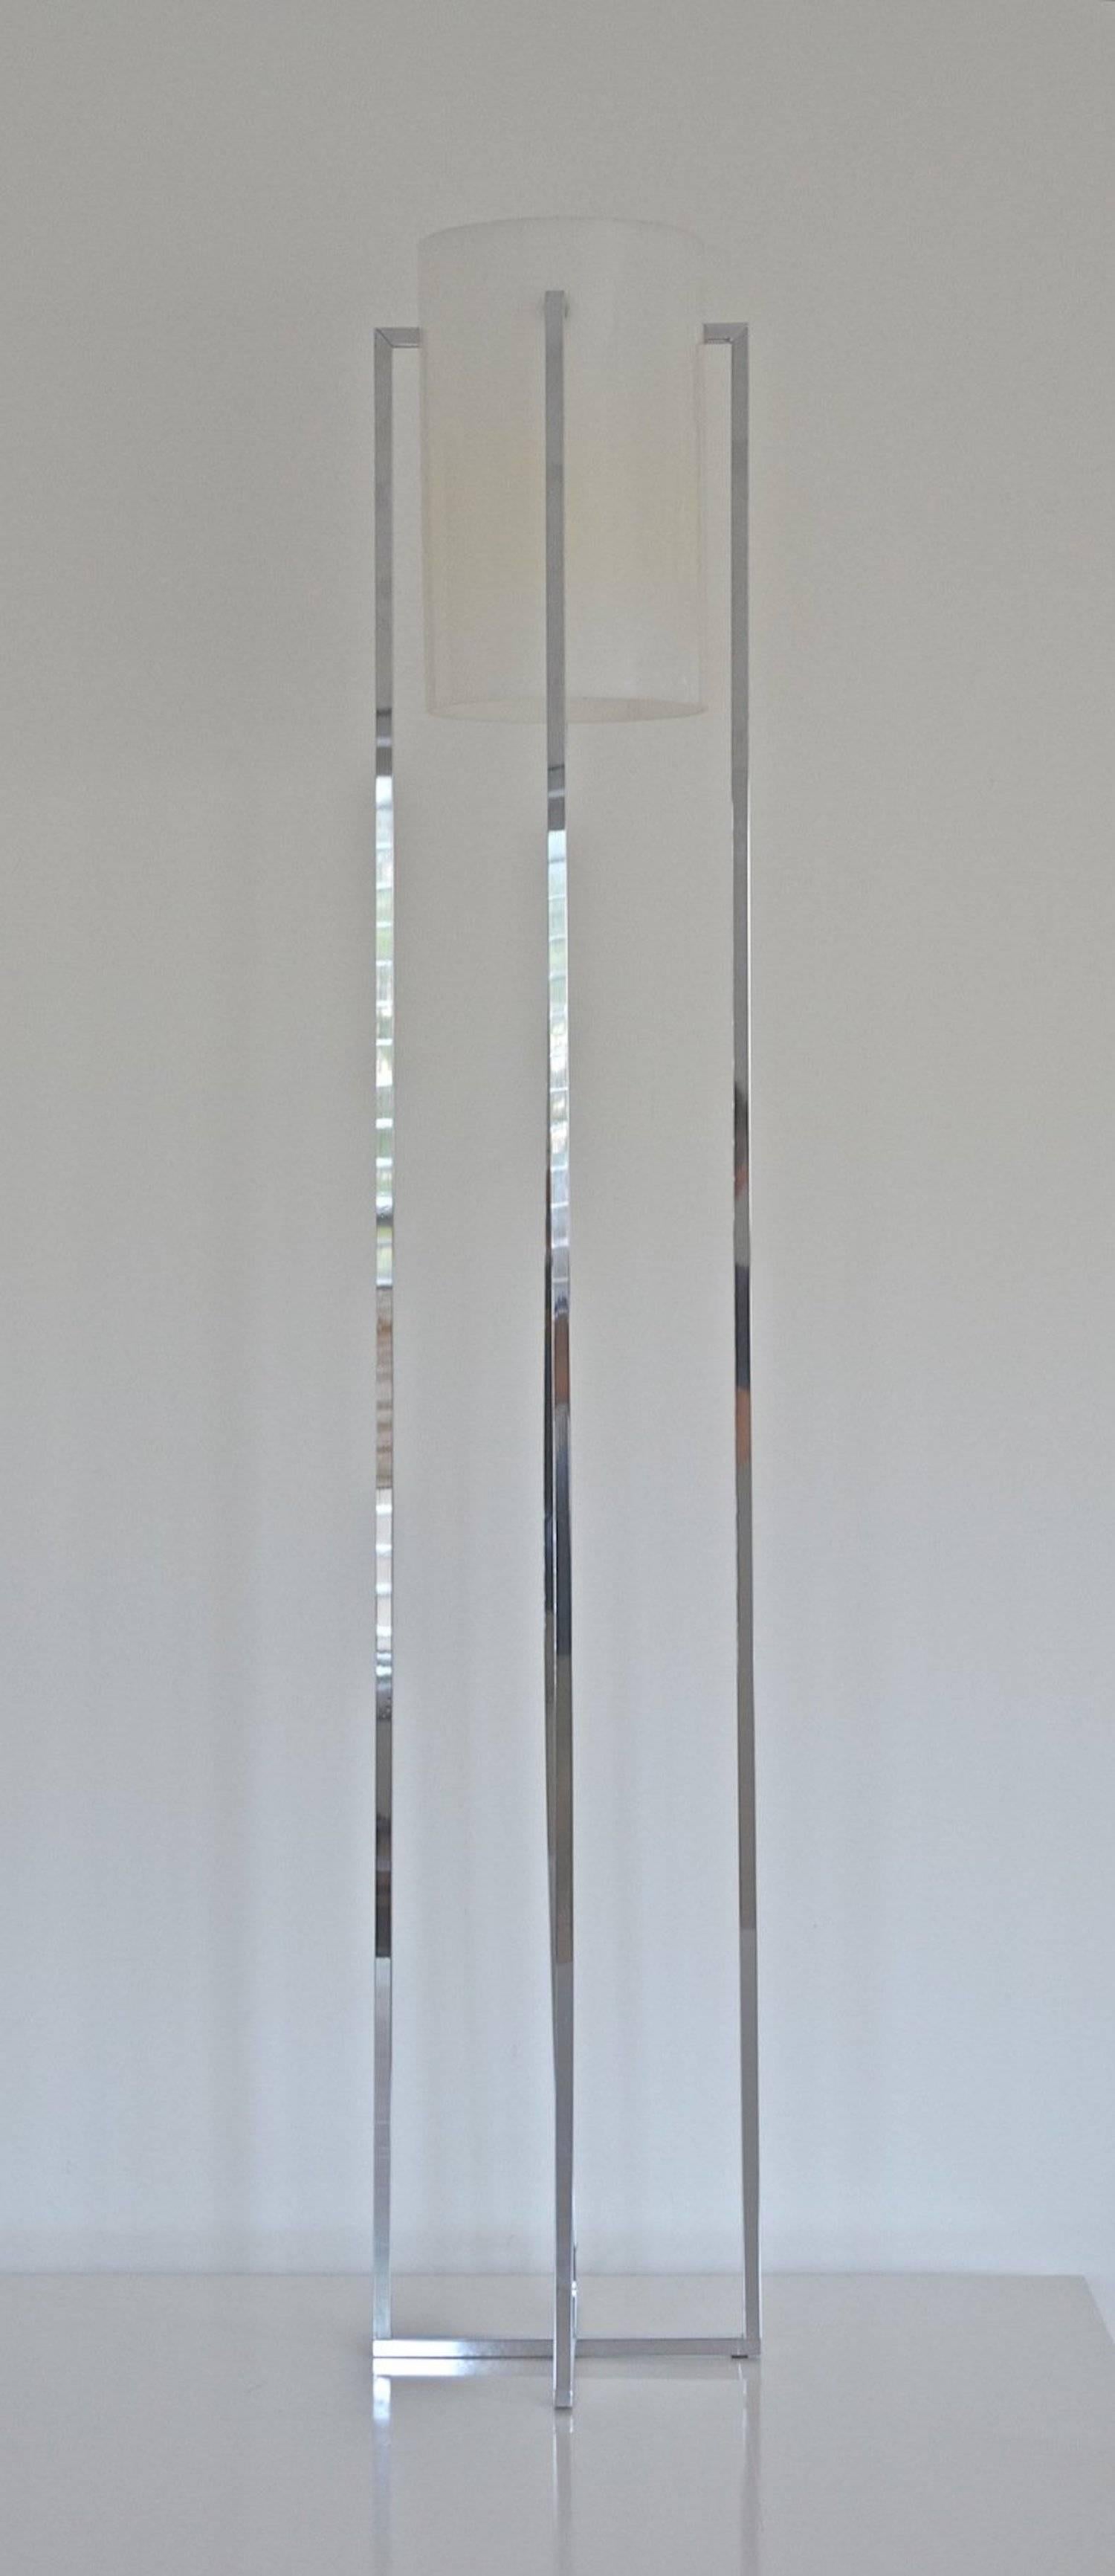 Architectural cruciform chrome floor lamp by Robert Sonneman, circa 1970s. This striking lamp is designed with a rectangular tube form frame and a round white acrylic / Lucite diffuser shade suspended at the top of the form.
 